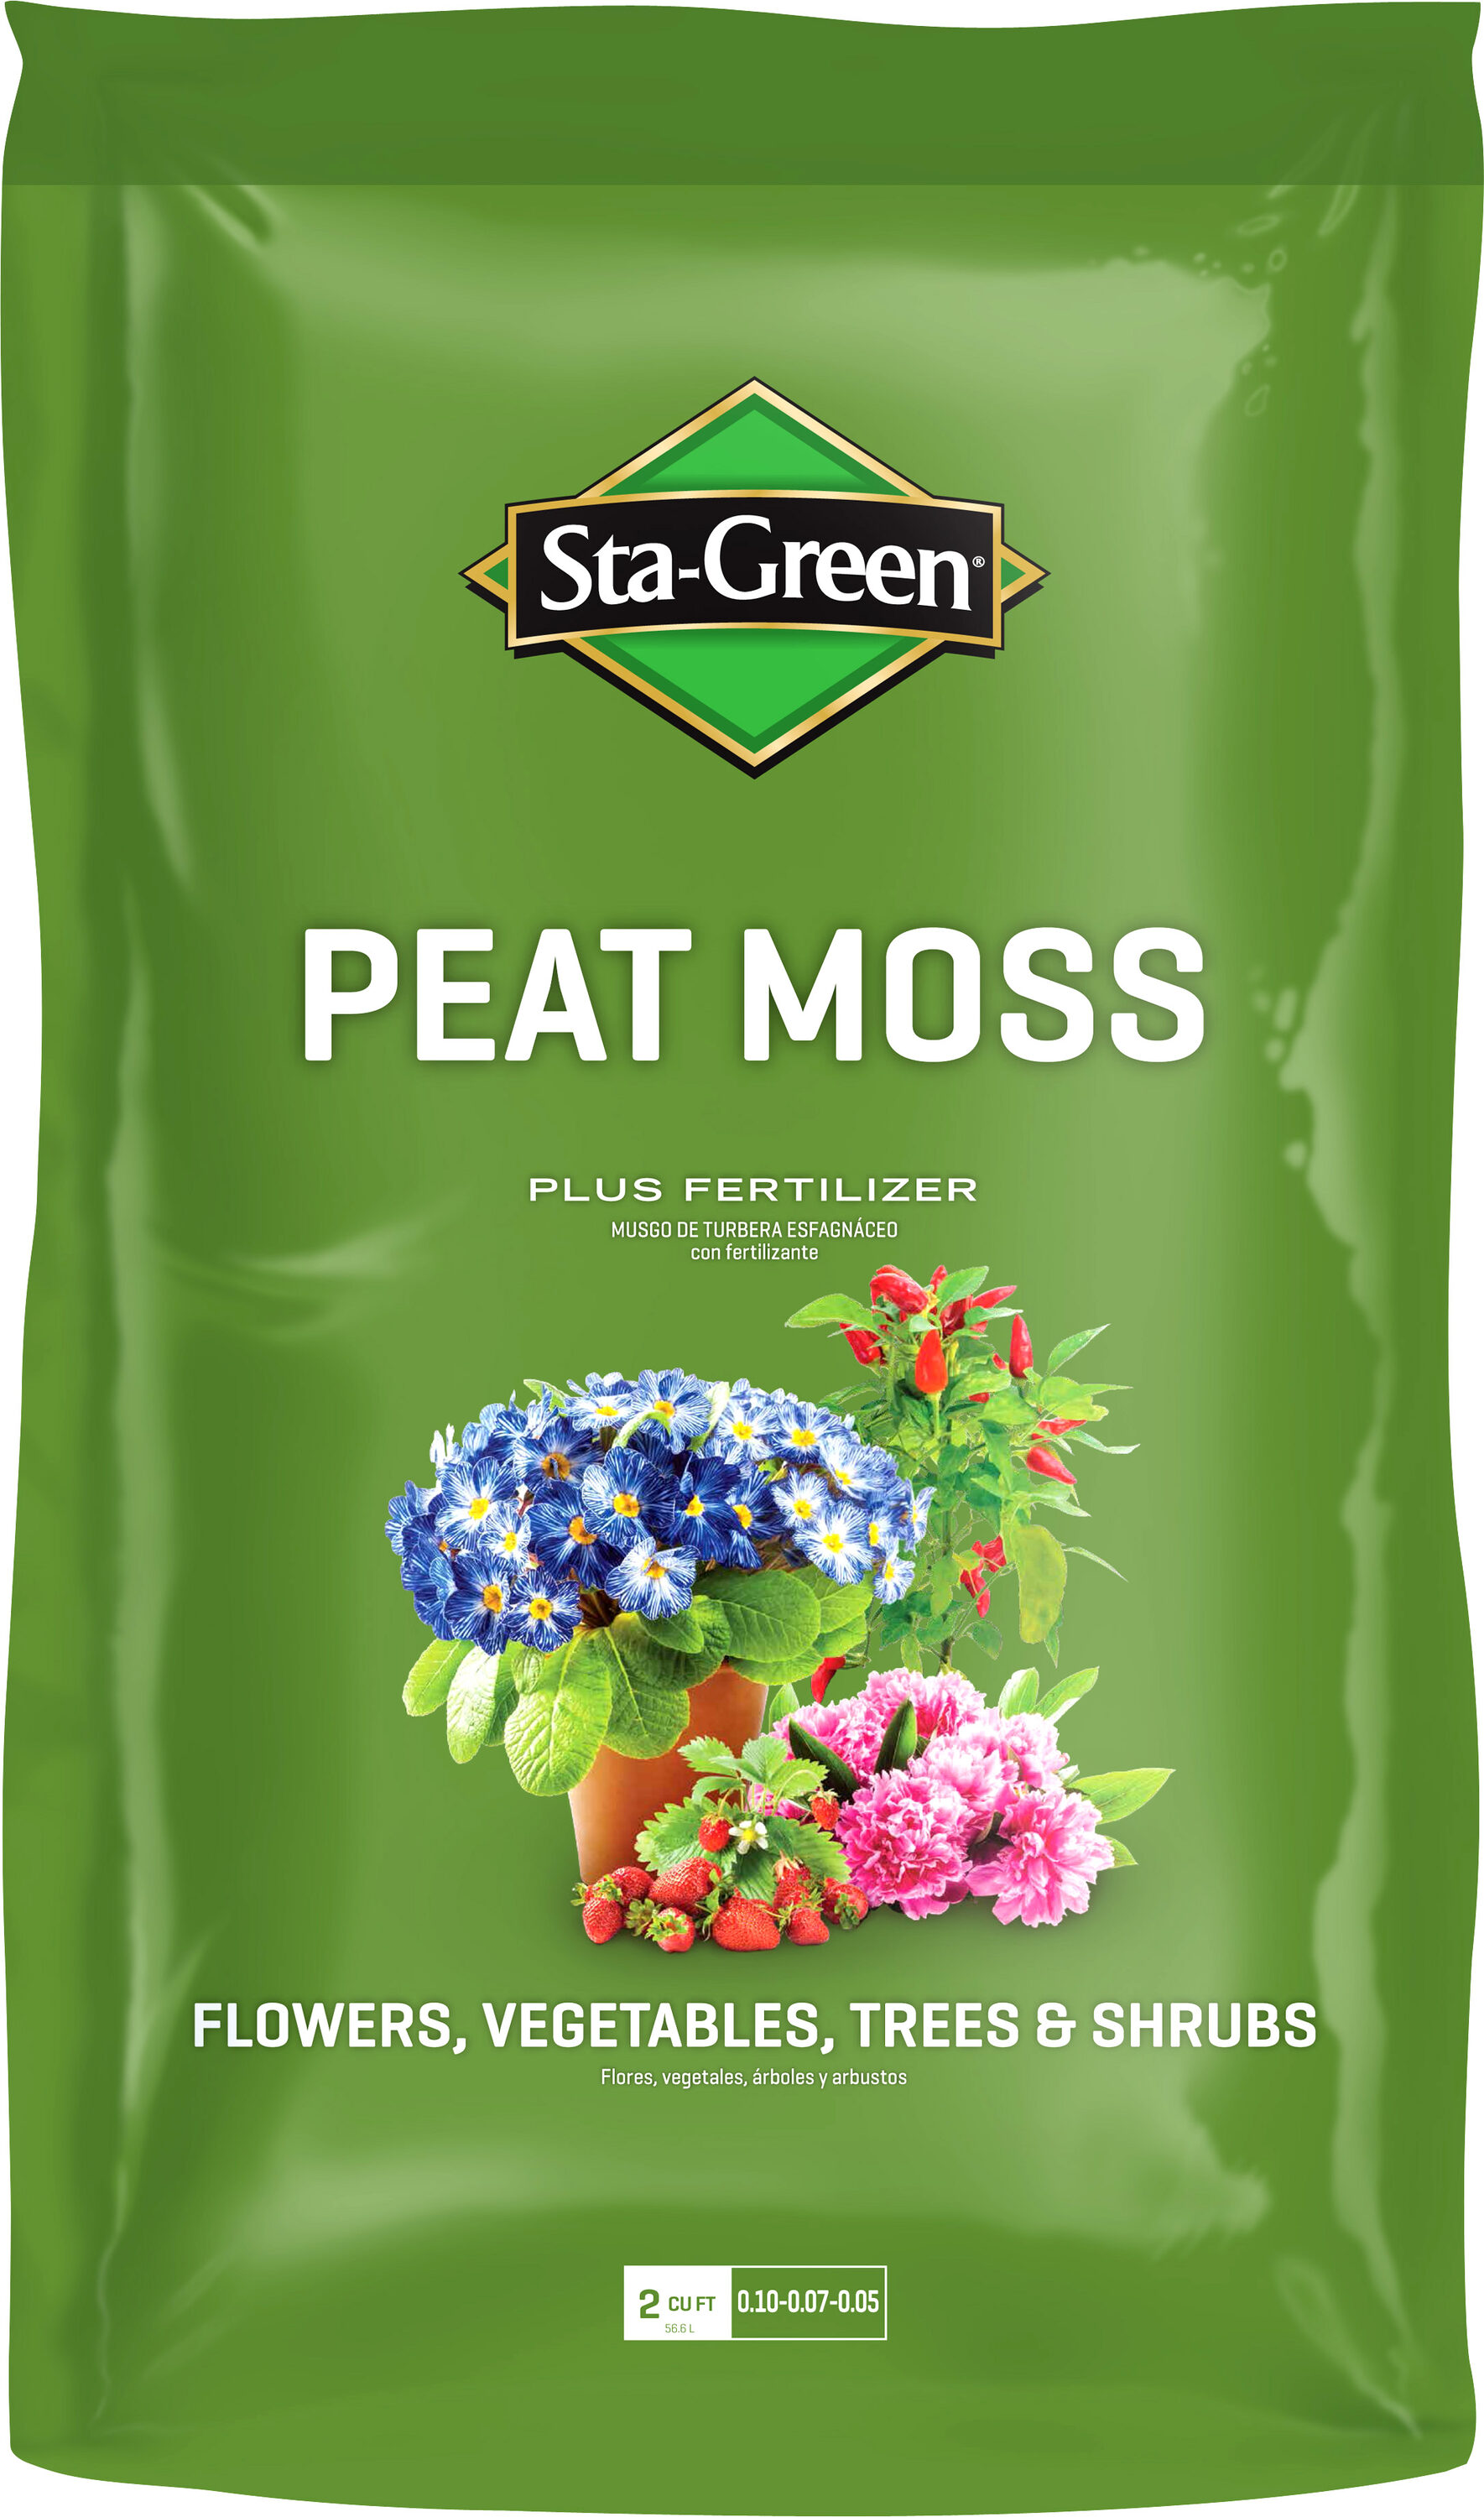 Sphagnum moss questions (green vs. brown and pet store vs. lowe's)